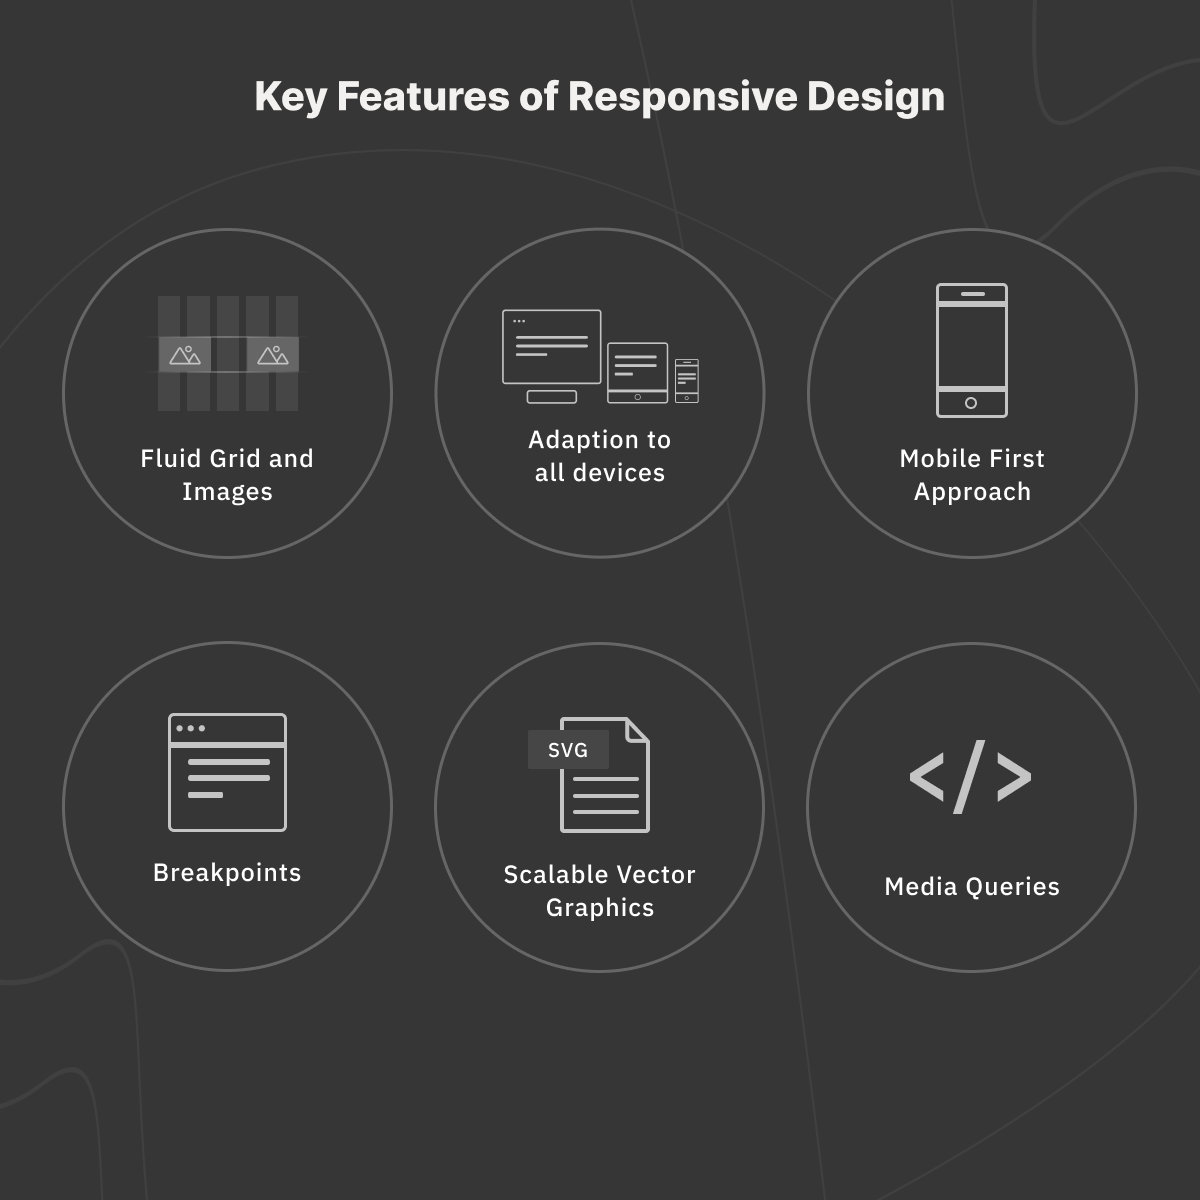 The Key Features of Responsive Design